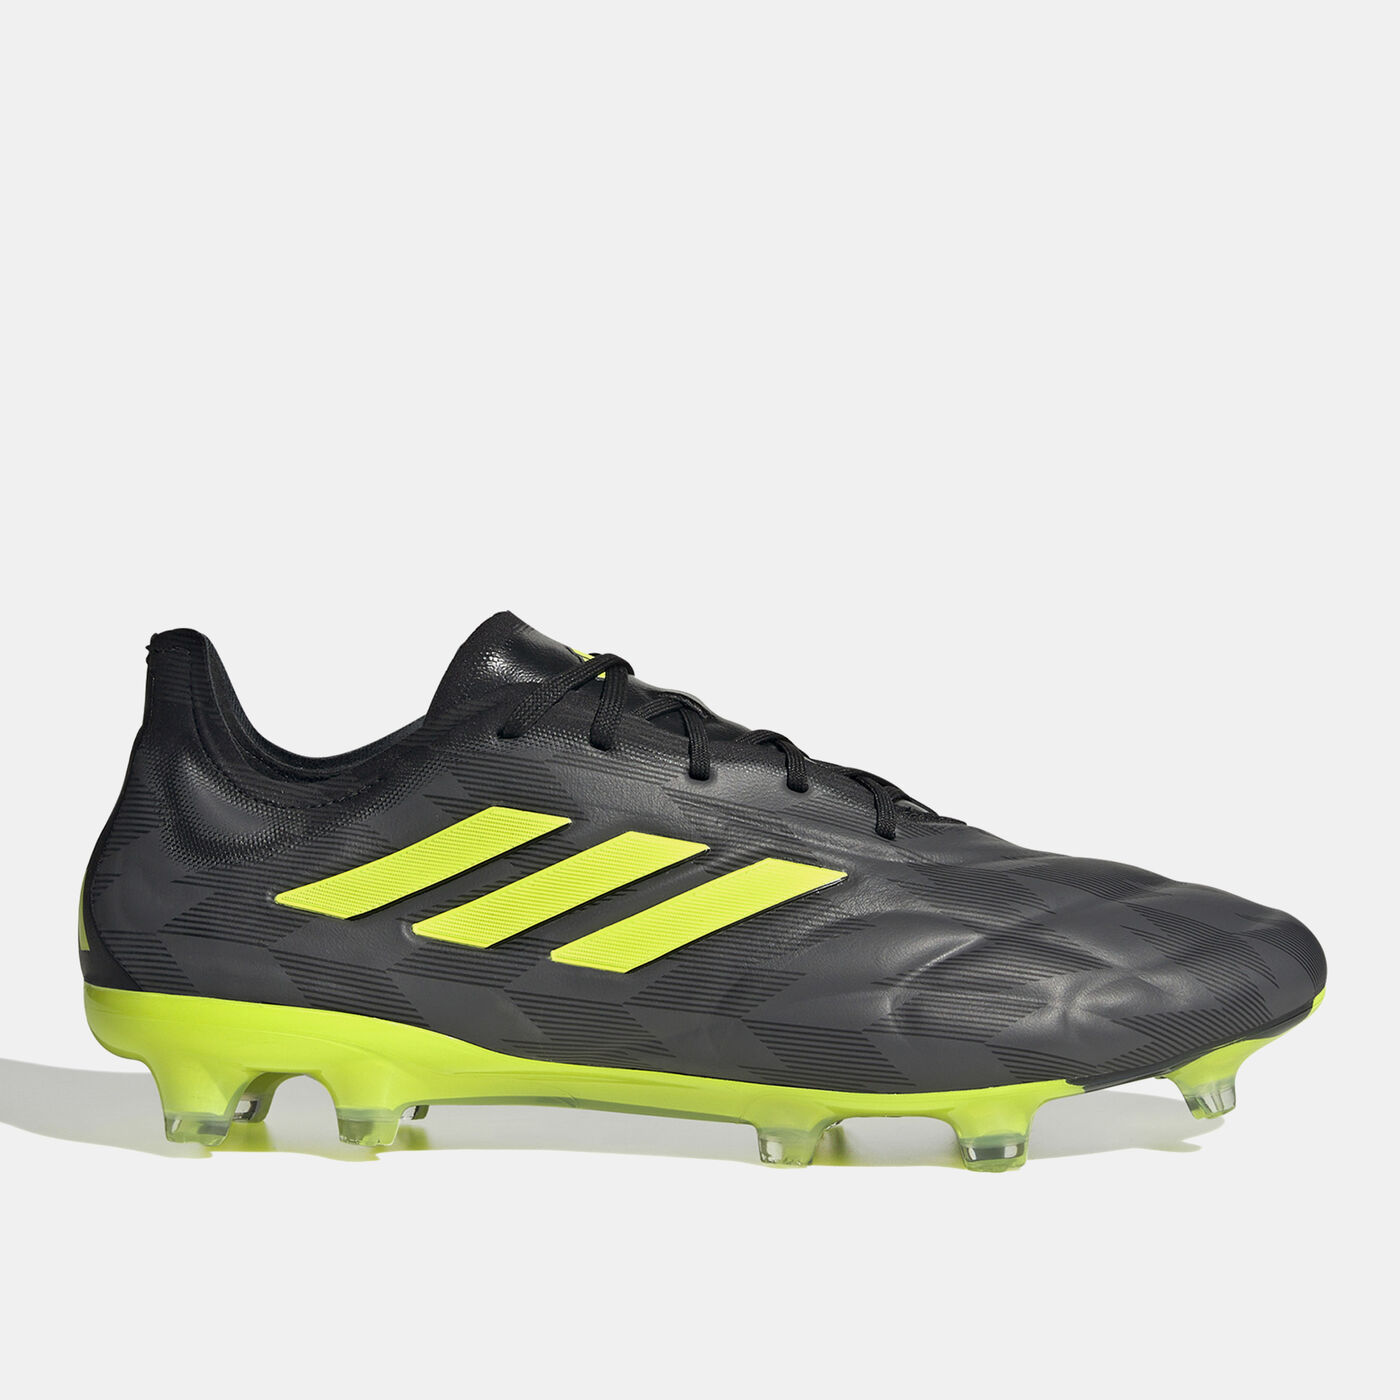 COPA PURE.1 Firm Ground Football Shoe